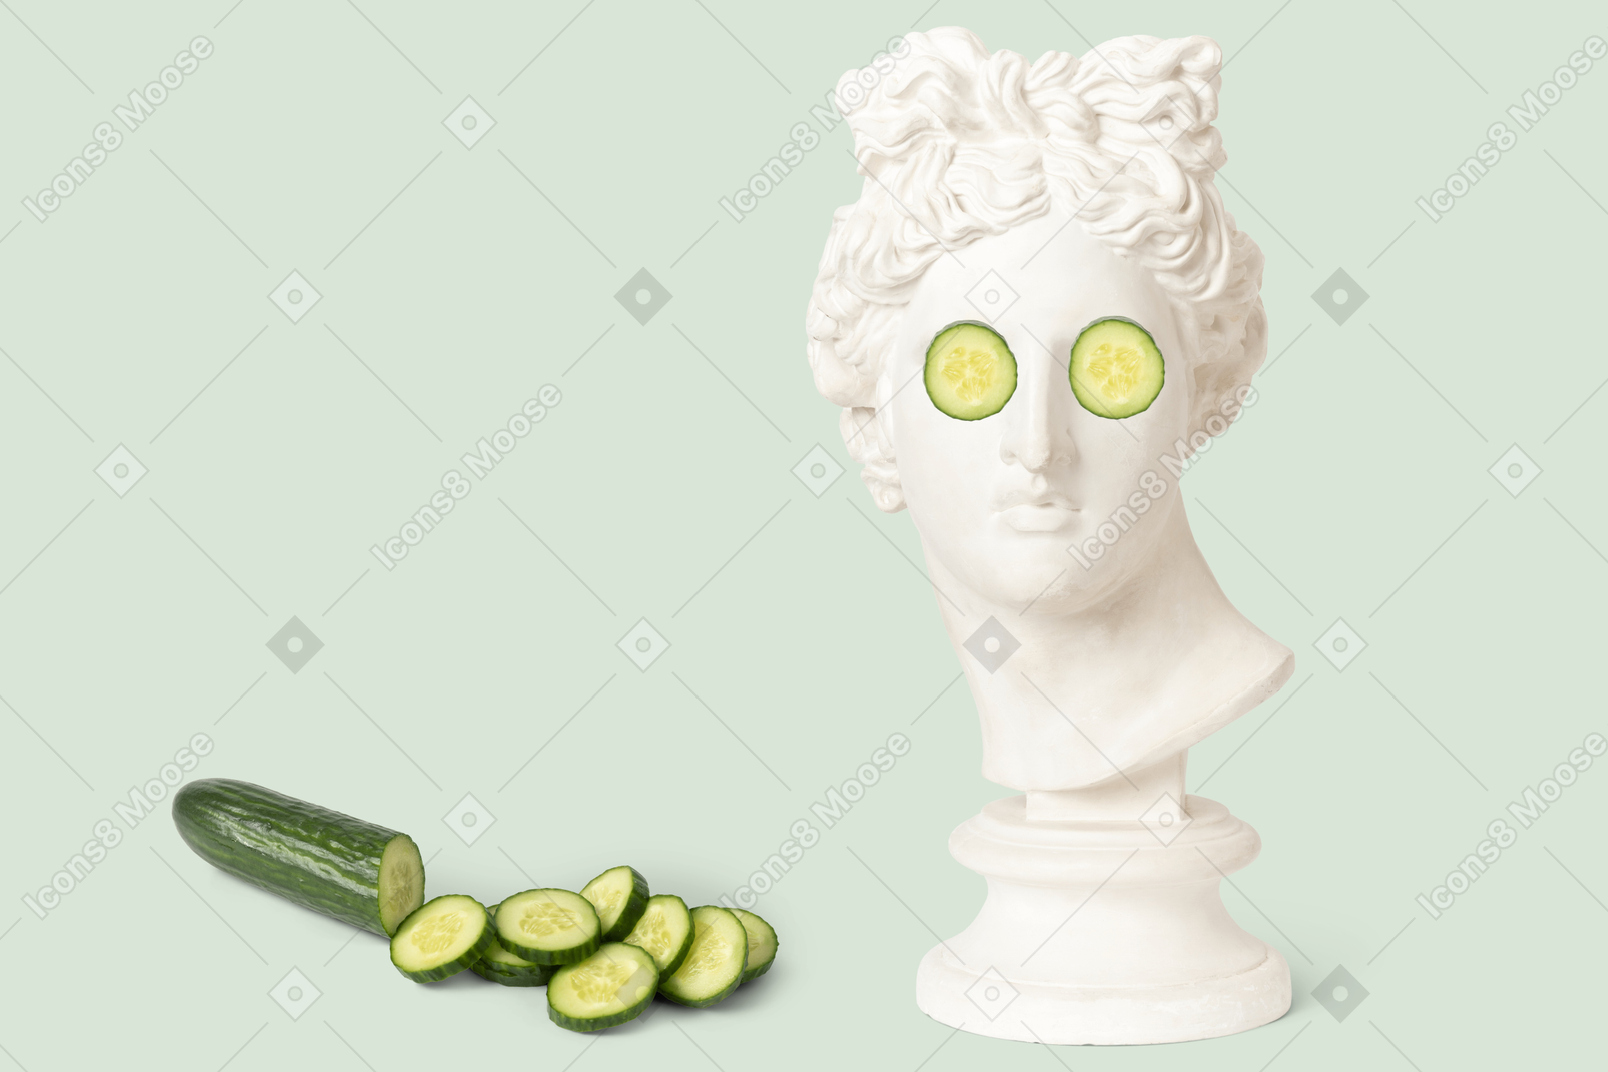 Cut cucumber and head with cucumber slices on it